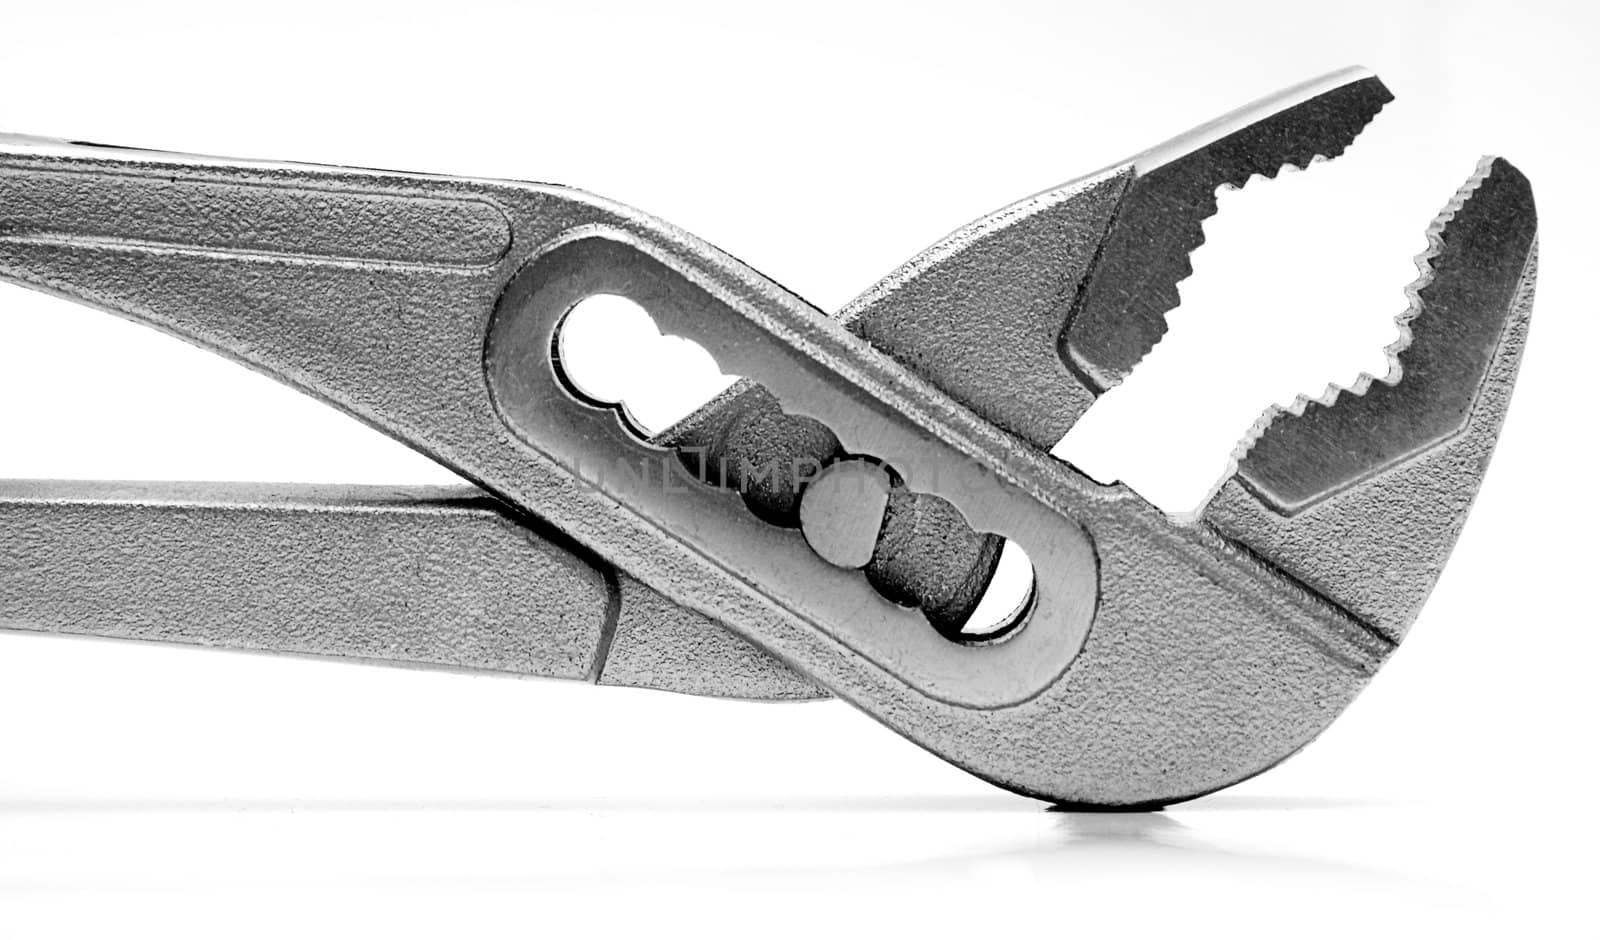 Gaspipe pliers isolated on a white background.